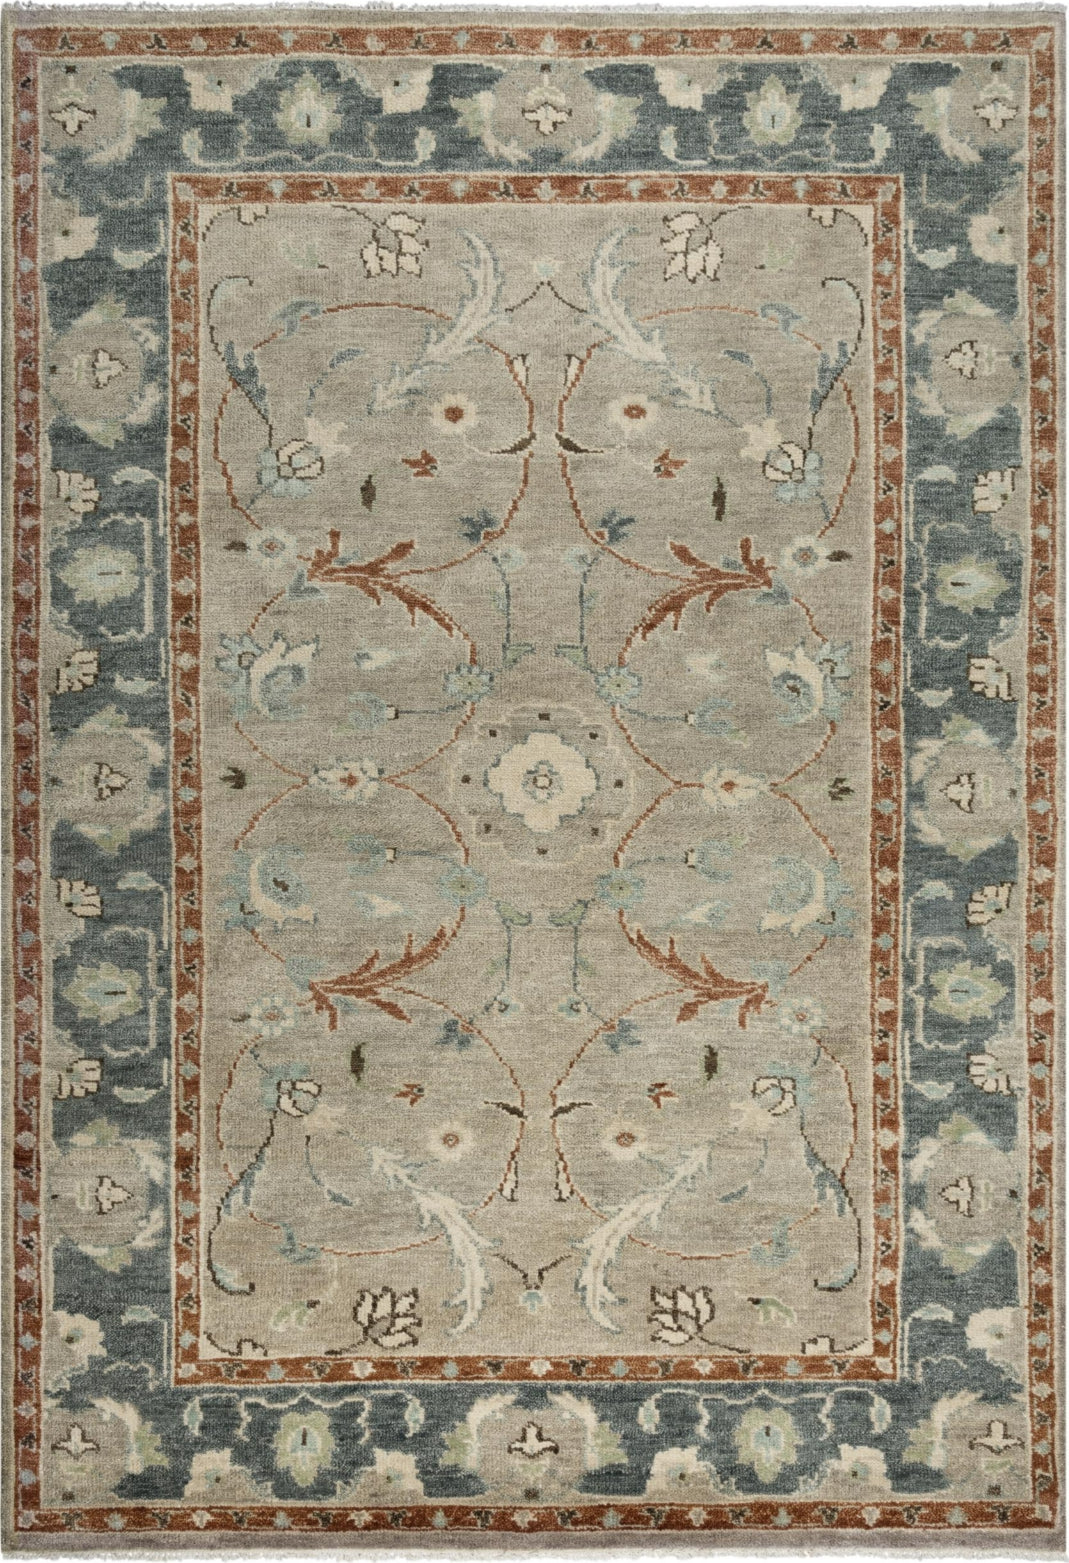 Rizzy Belmont BMT956 Light Blue Area Rug